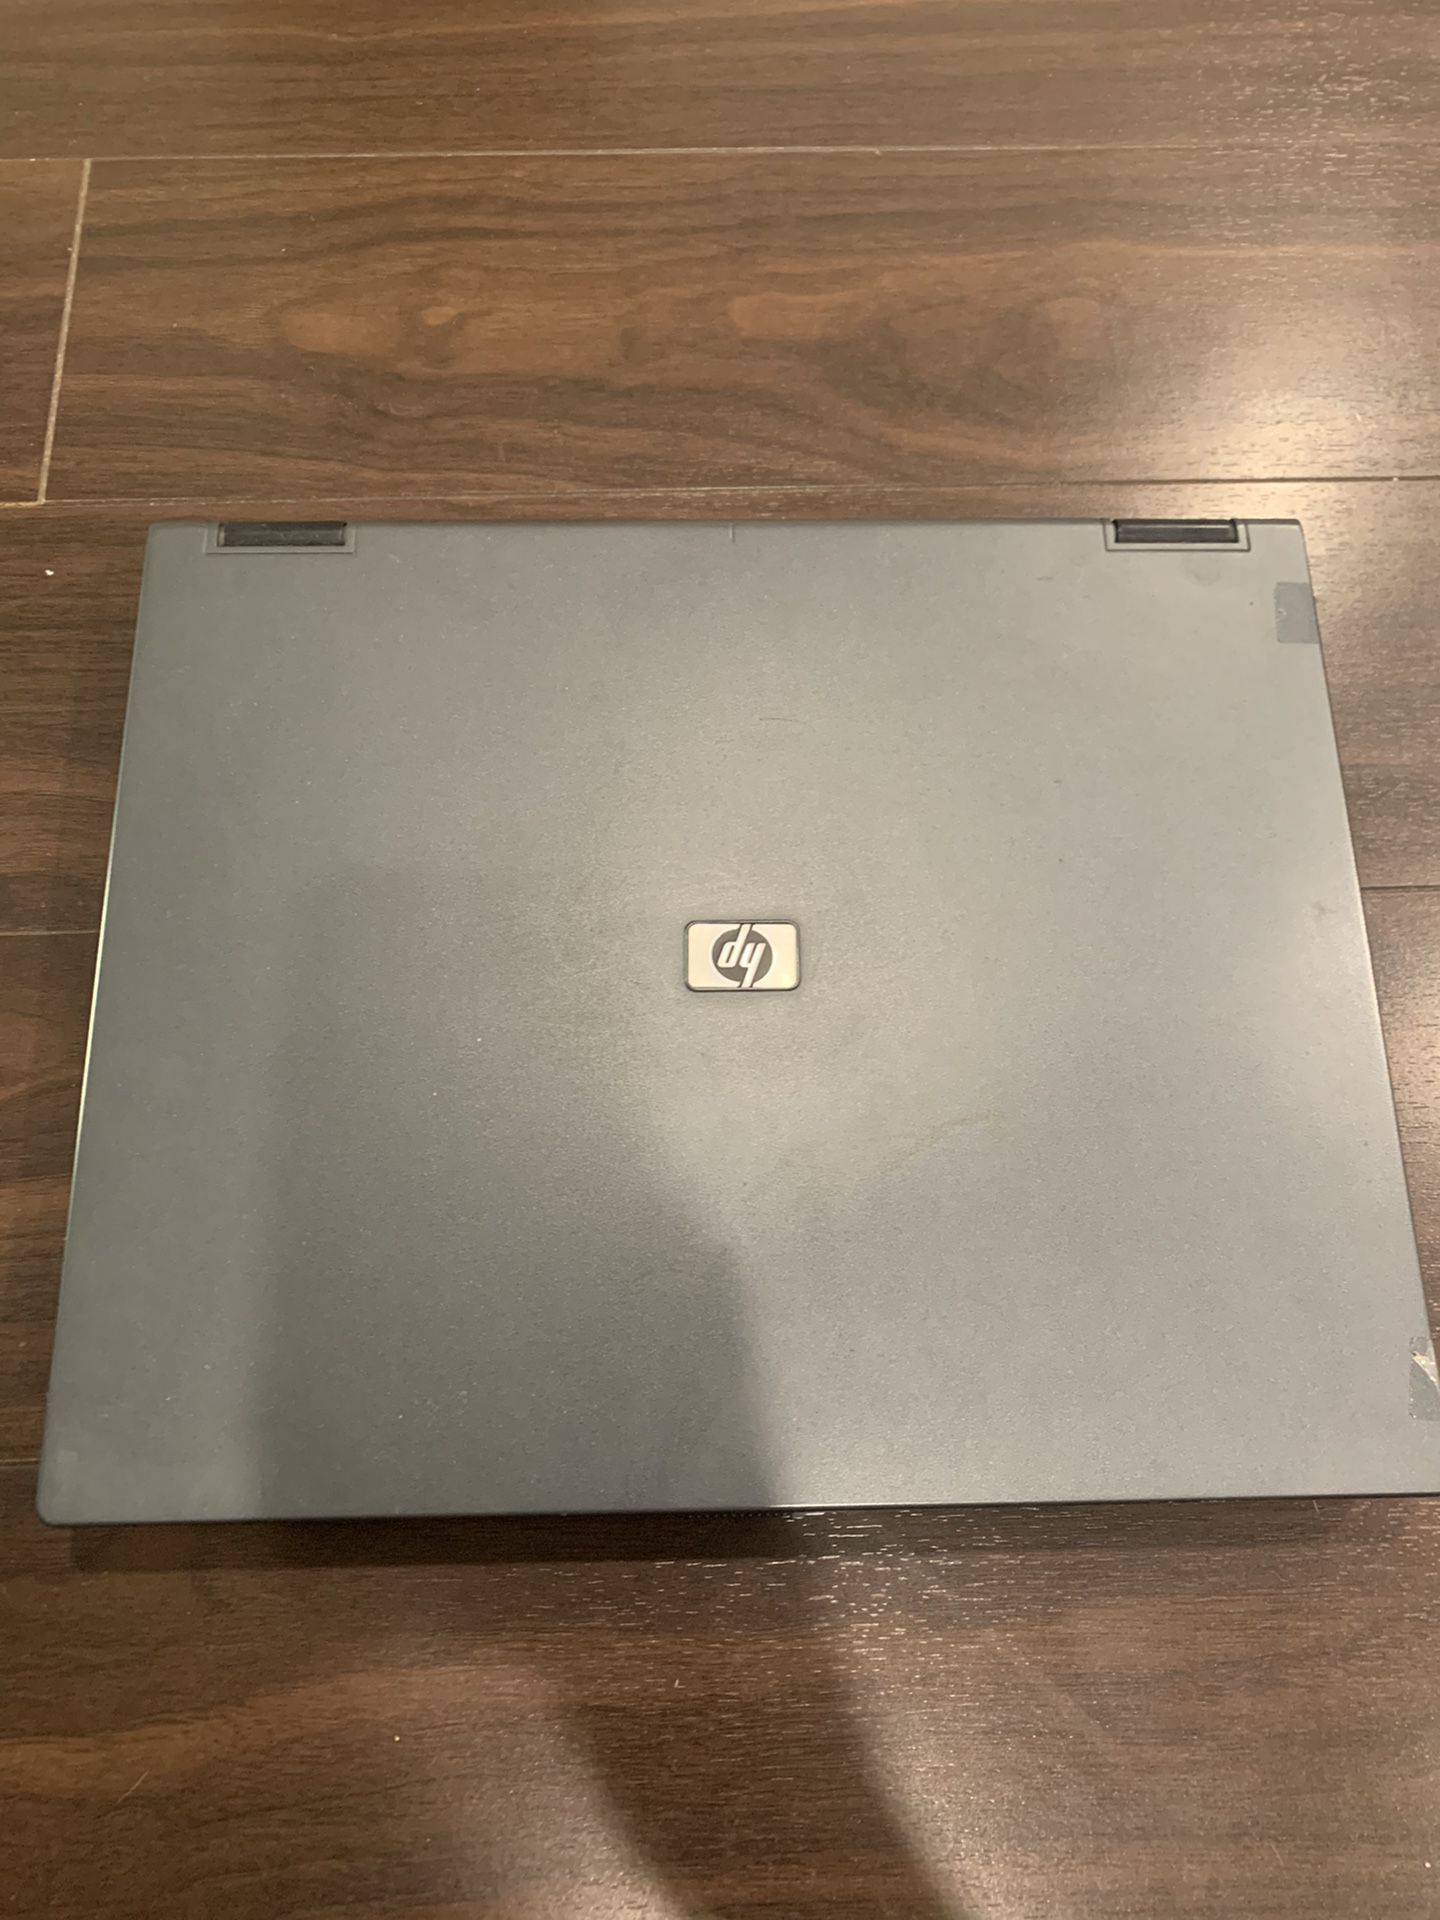 Used HP notebook pc works great!